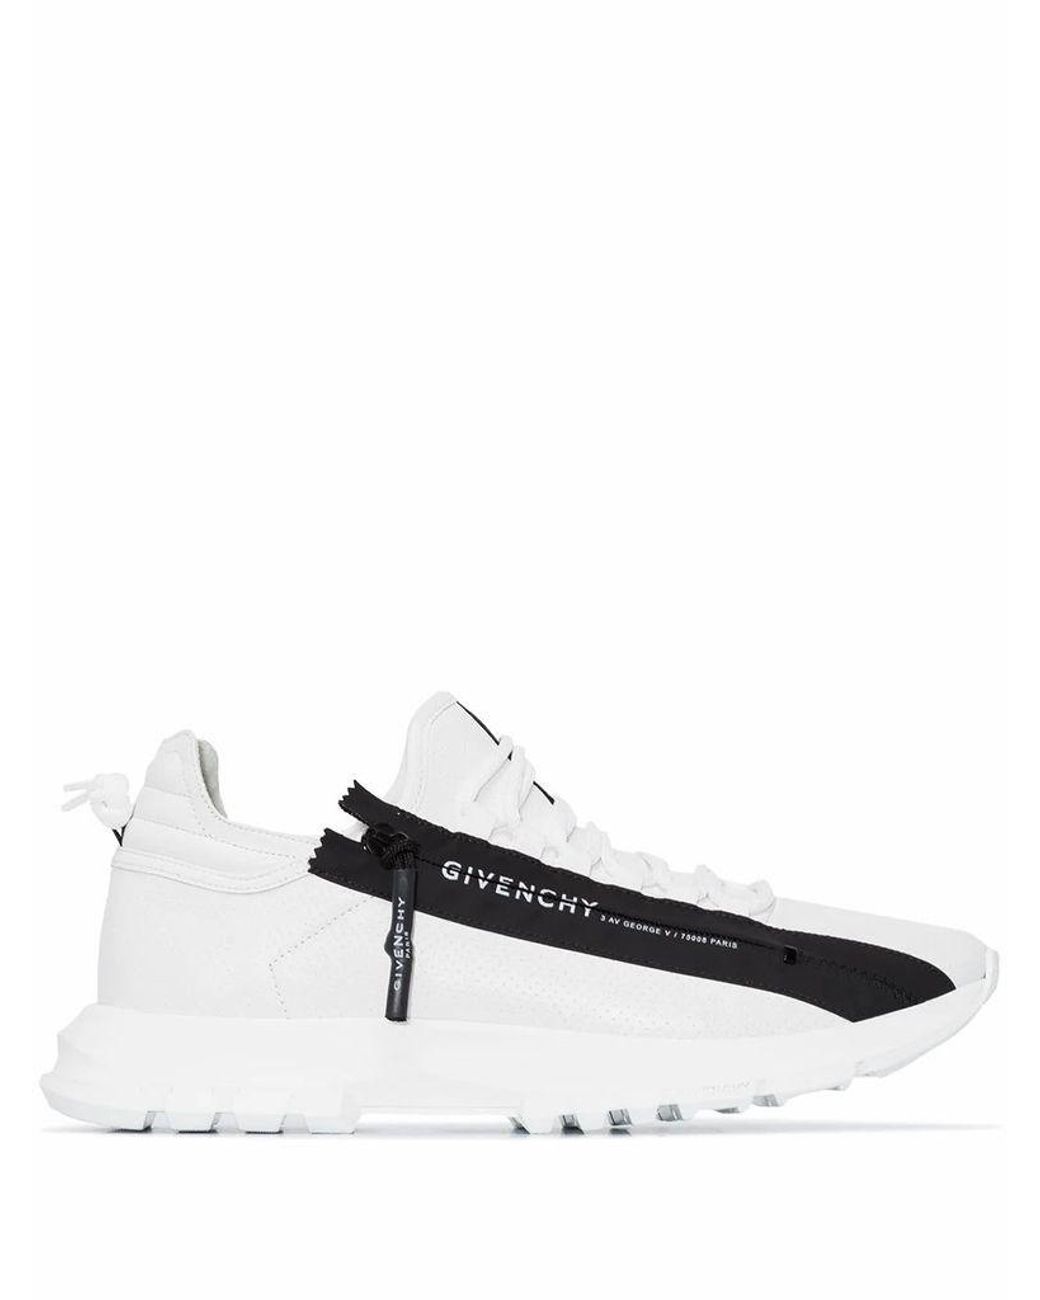 Givenchy Men's Bh003mh0nj100 White Leather Sneakers for Men - Lyst